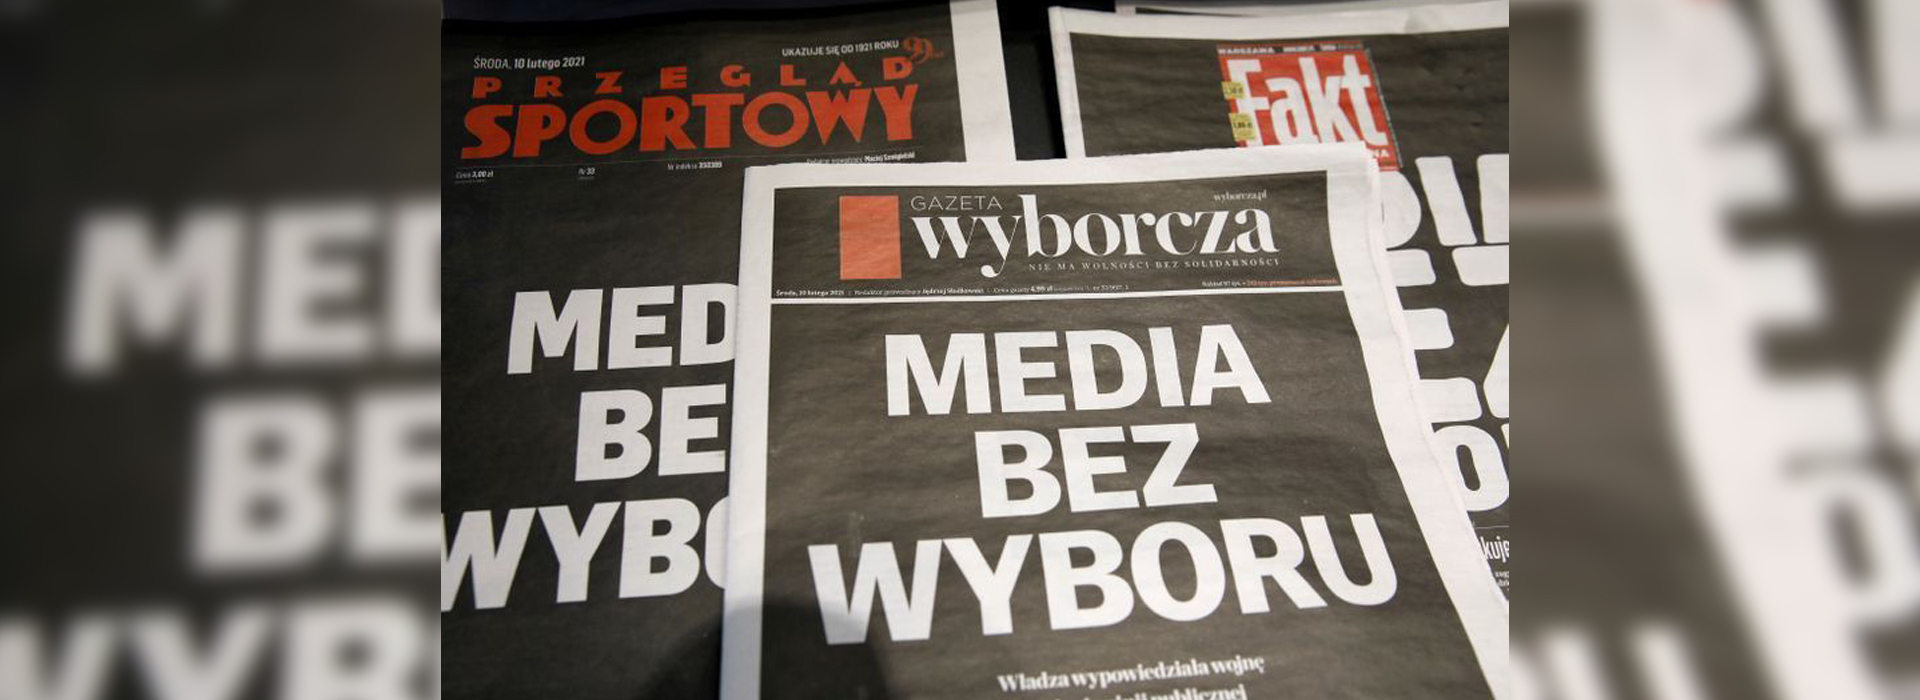 New Advertising Tax Sparks Major Protests From Polish Media Players